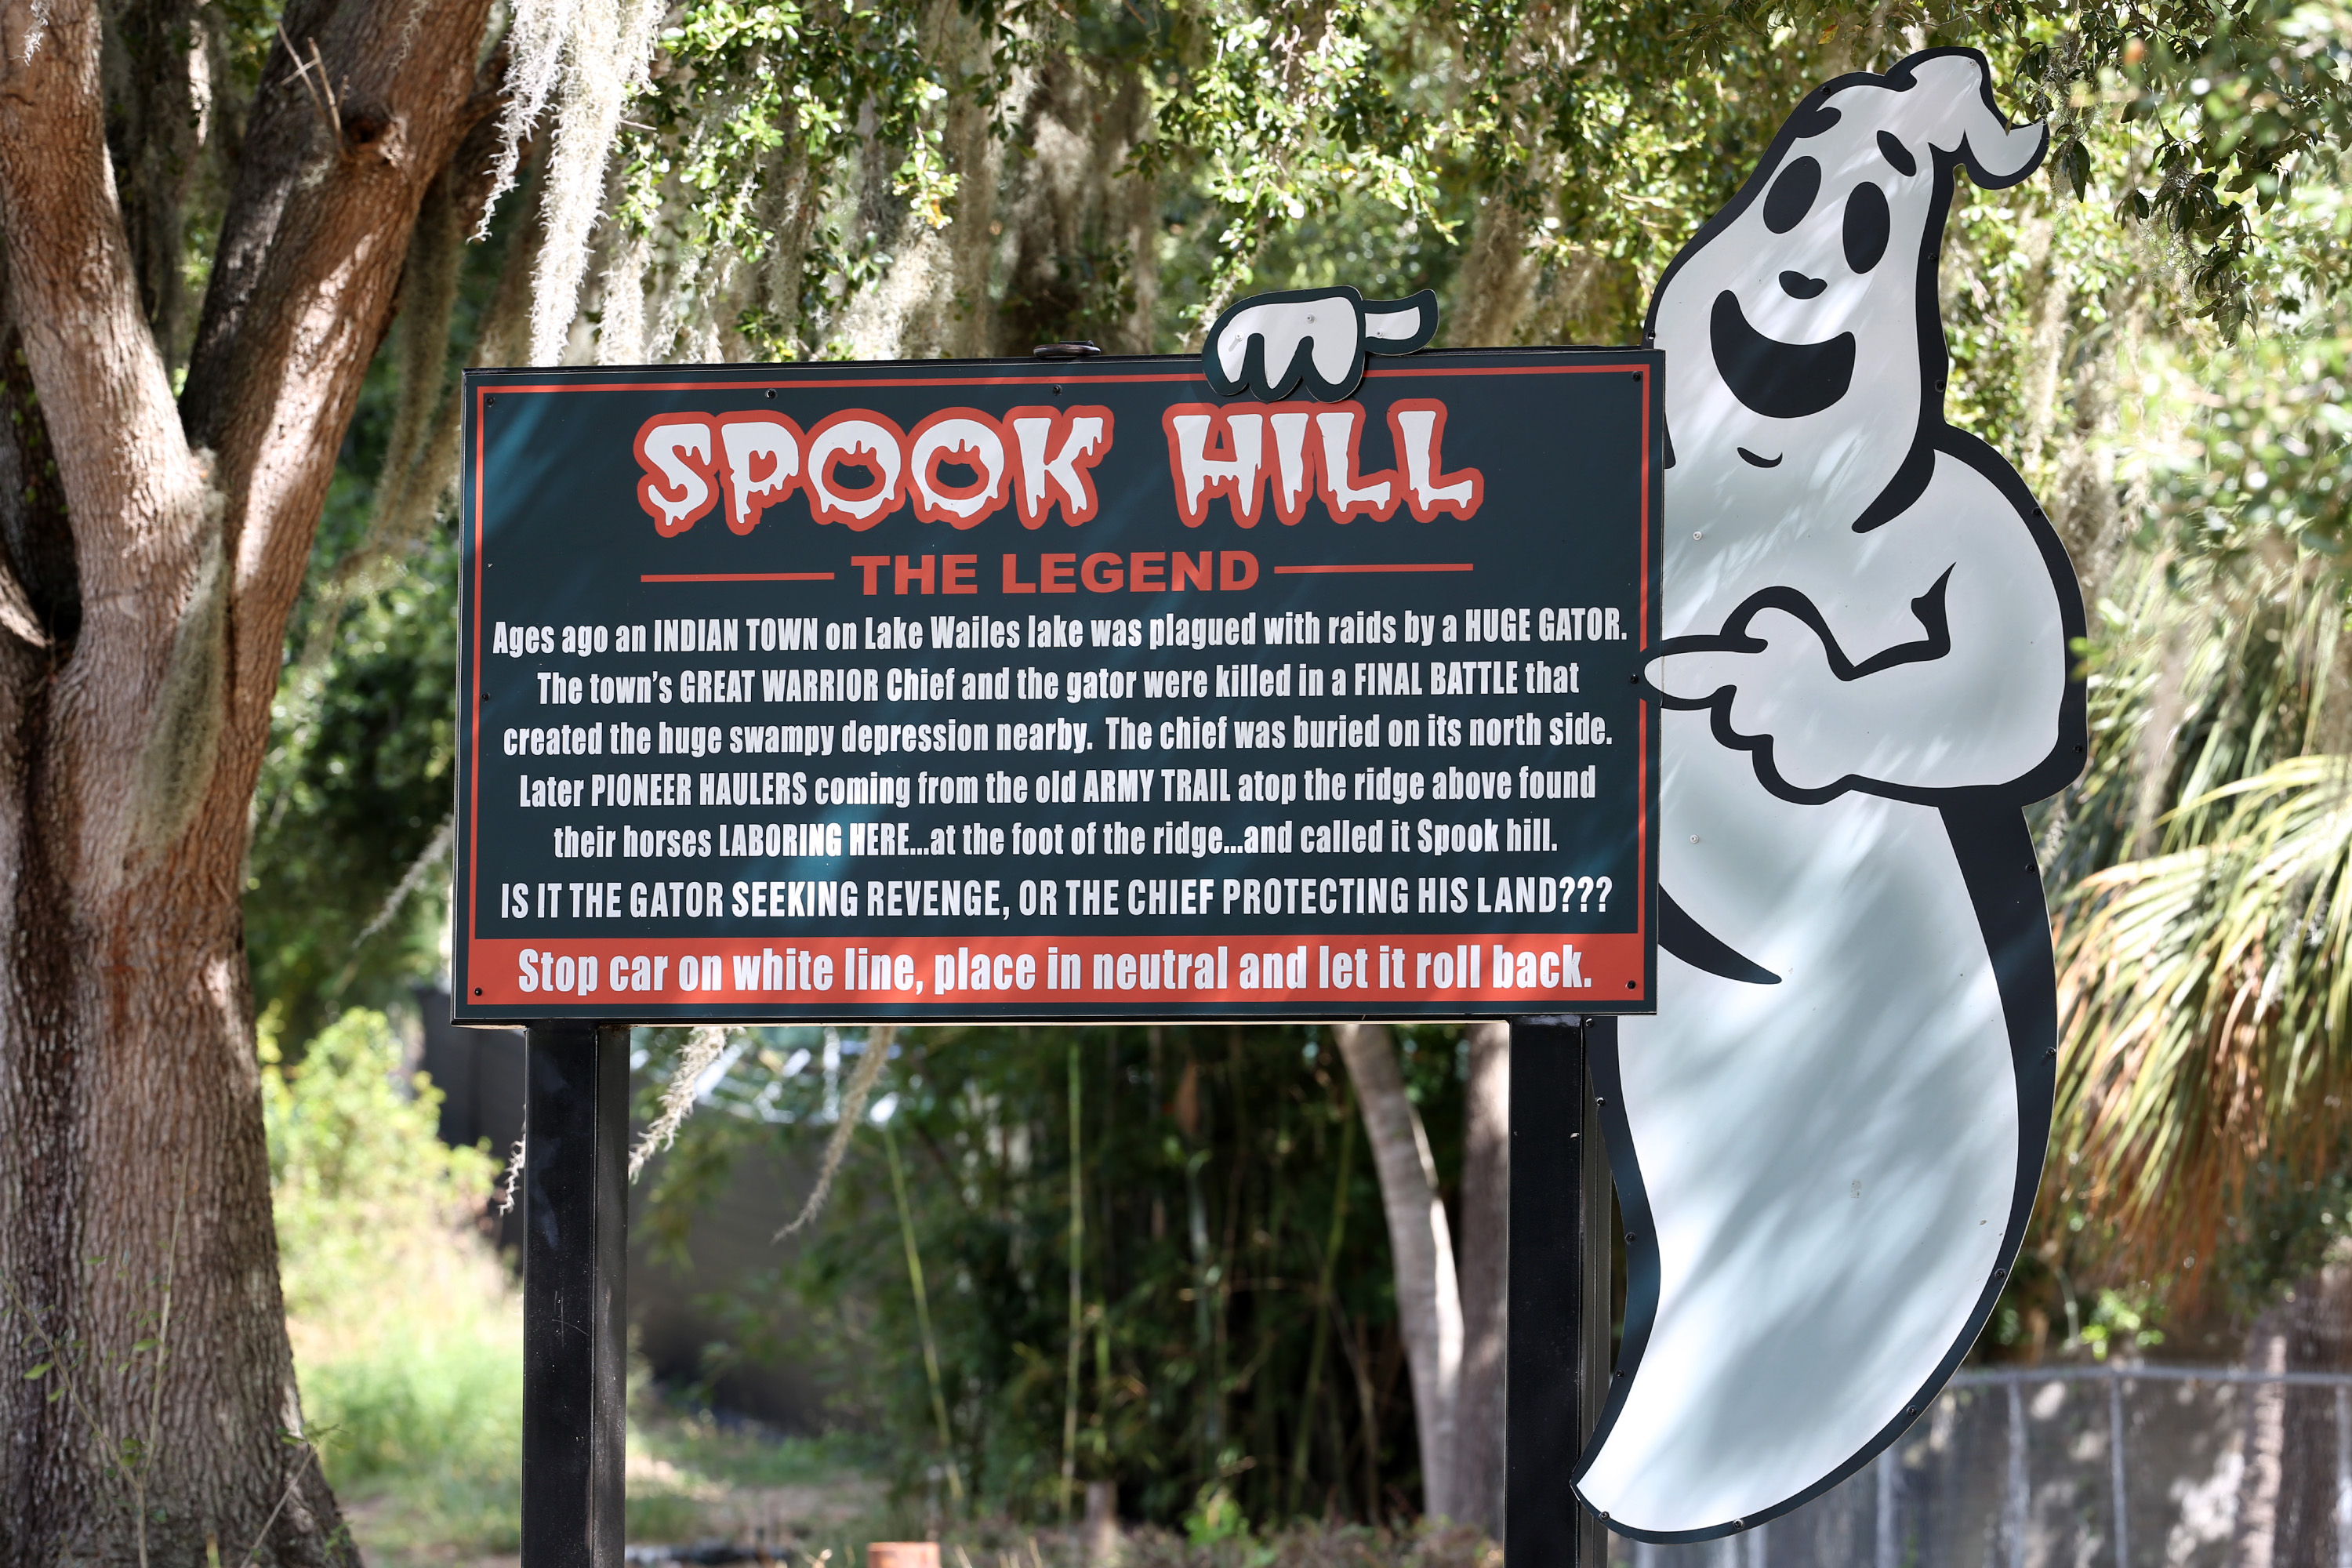 Florida's Spook Hill defies gravity. What's the secret of the thrill?